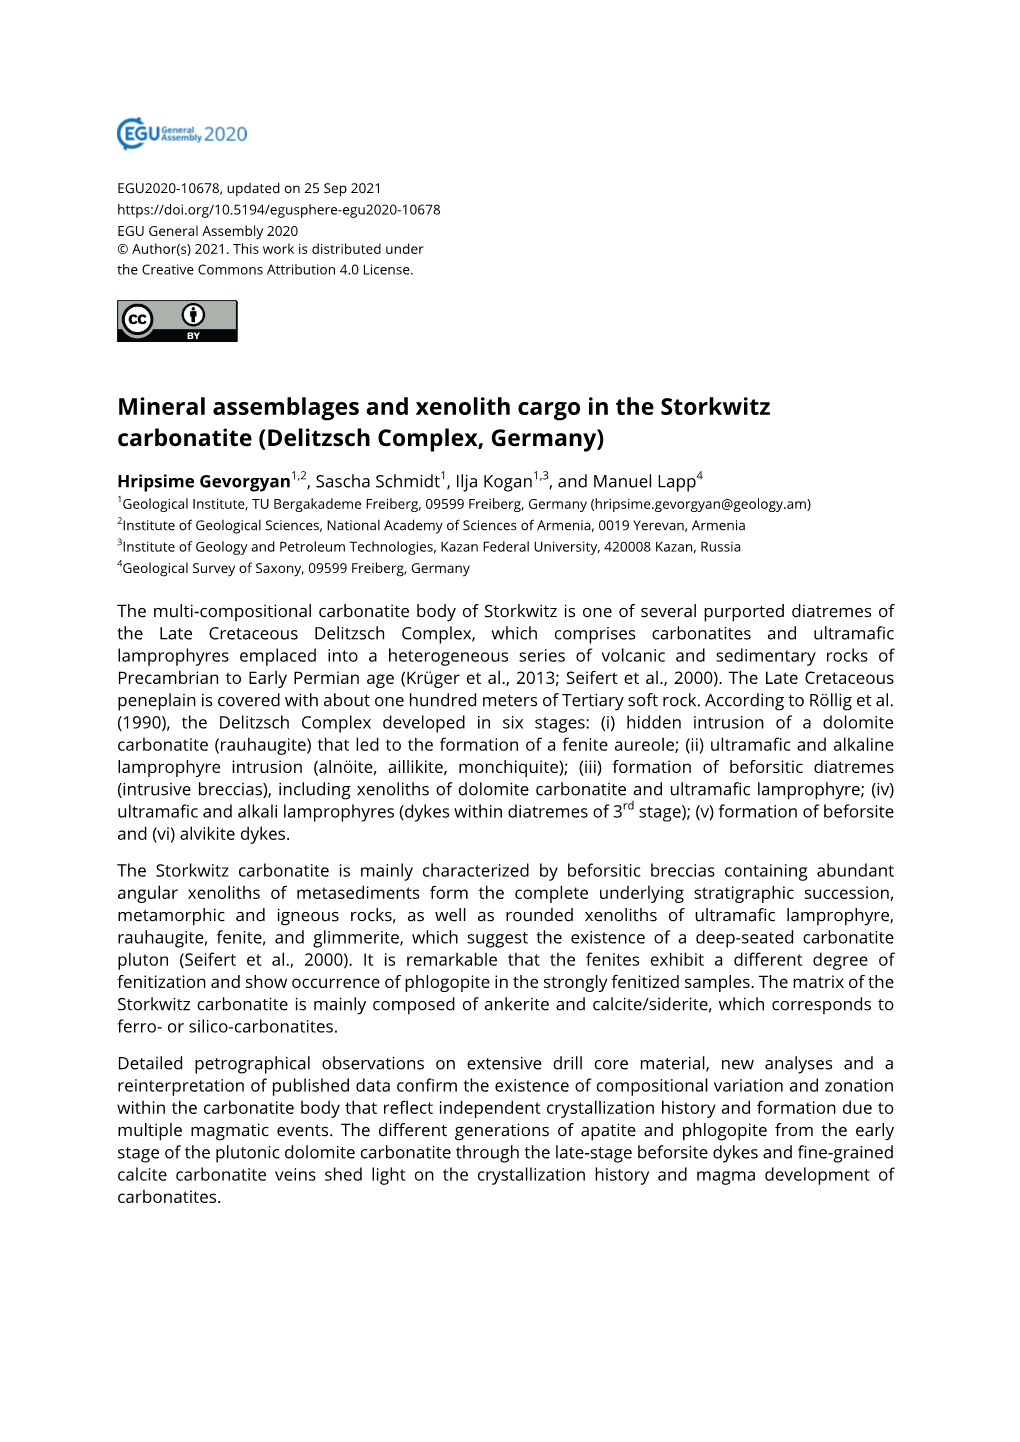 Mineral Assemblages and Xenolith Cargo in the Storkwitz Carbonatite (Delitzsch Complex, Germany)